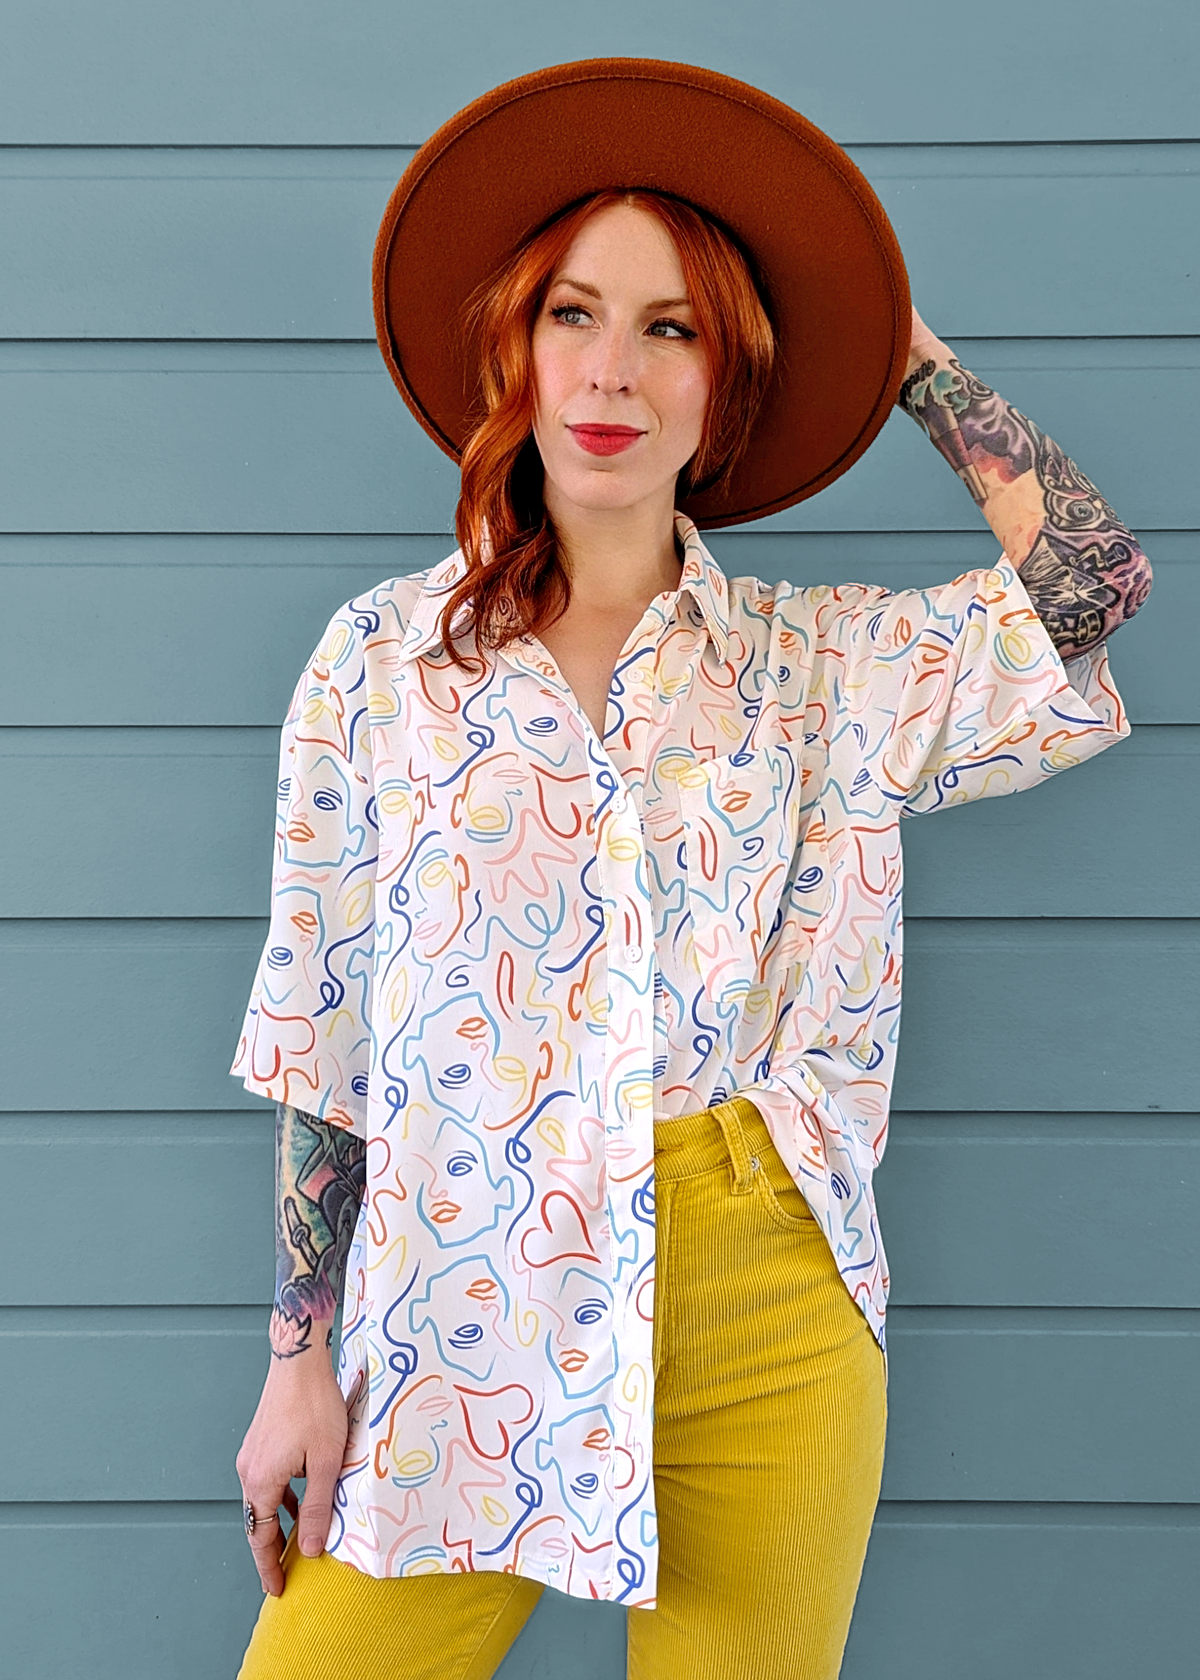 80s style oversized collared button up shirt with abstract rainbow face pattern by Glamorous UK